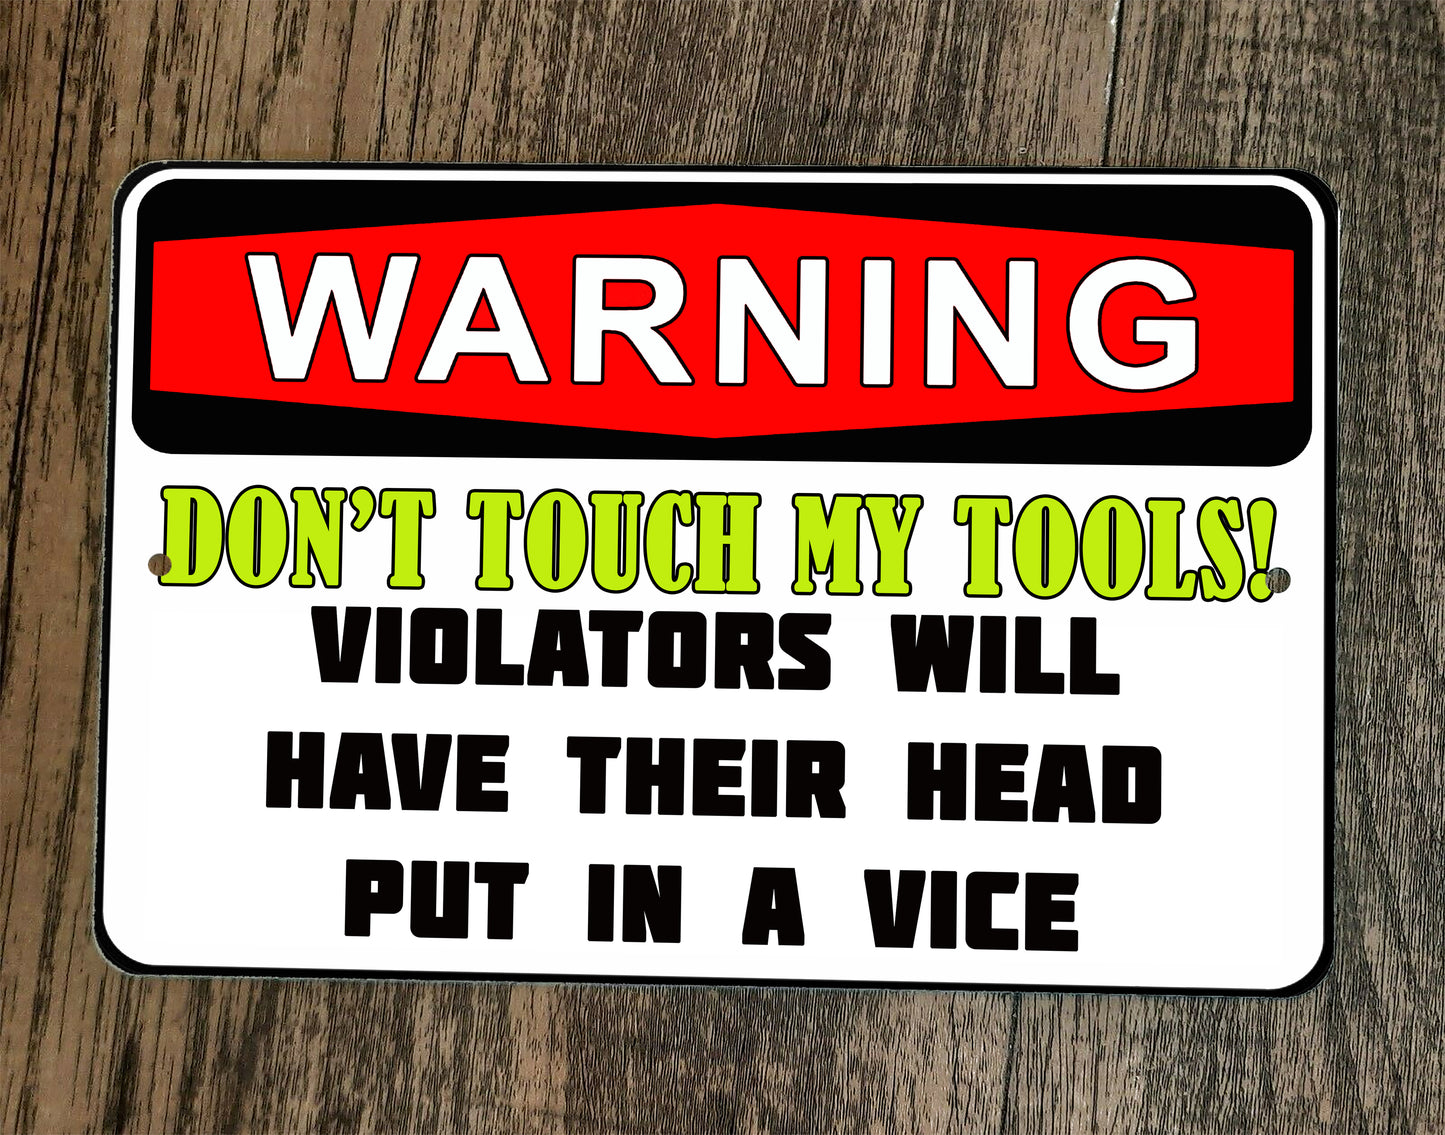 Do Not Touch My Tools Violators Will Have Their Head Put in a Vice 8x12 Metal Warning Sign Garage Poster